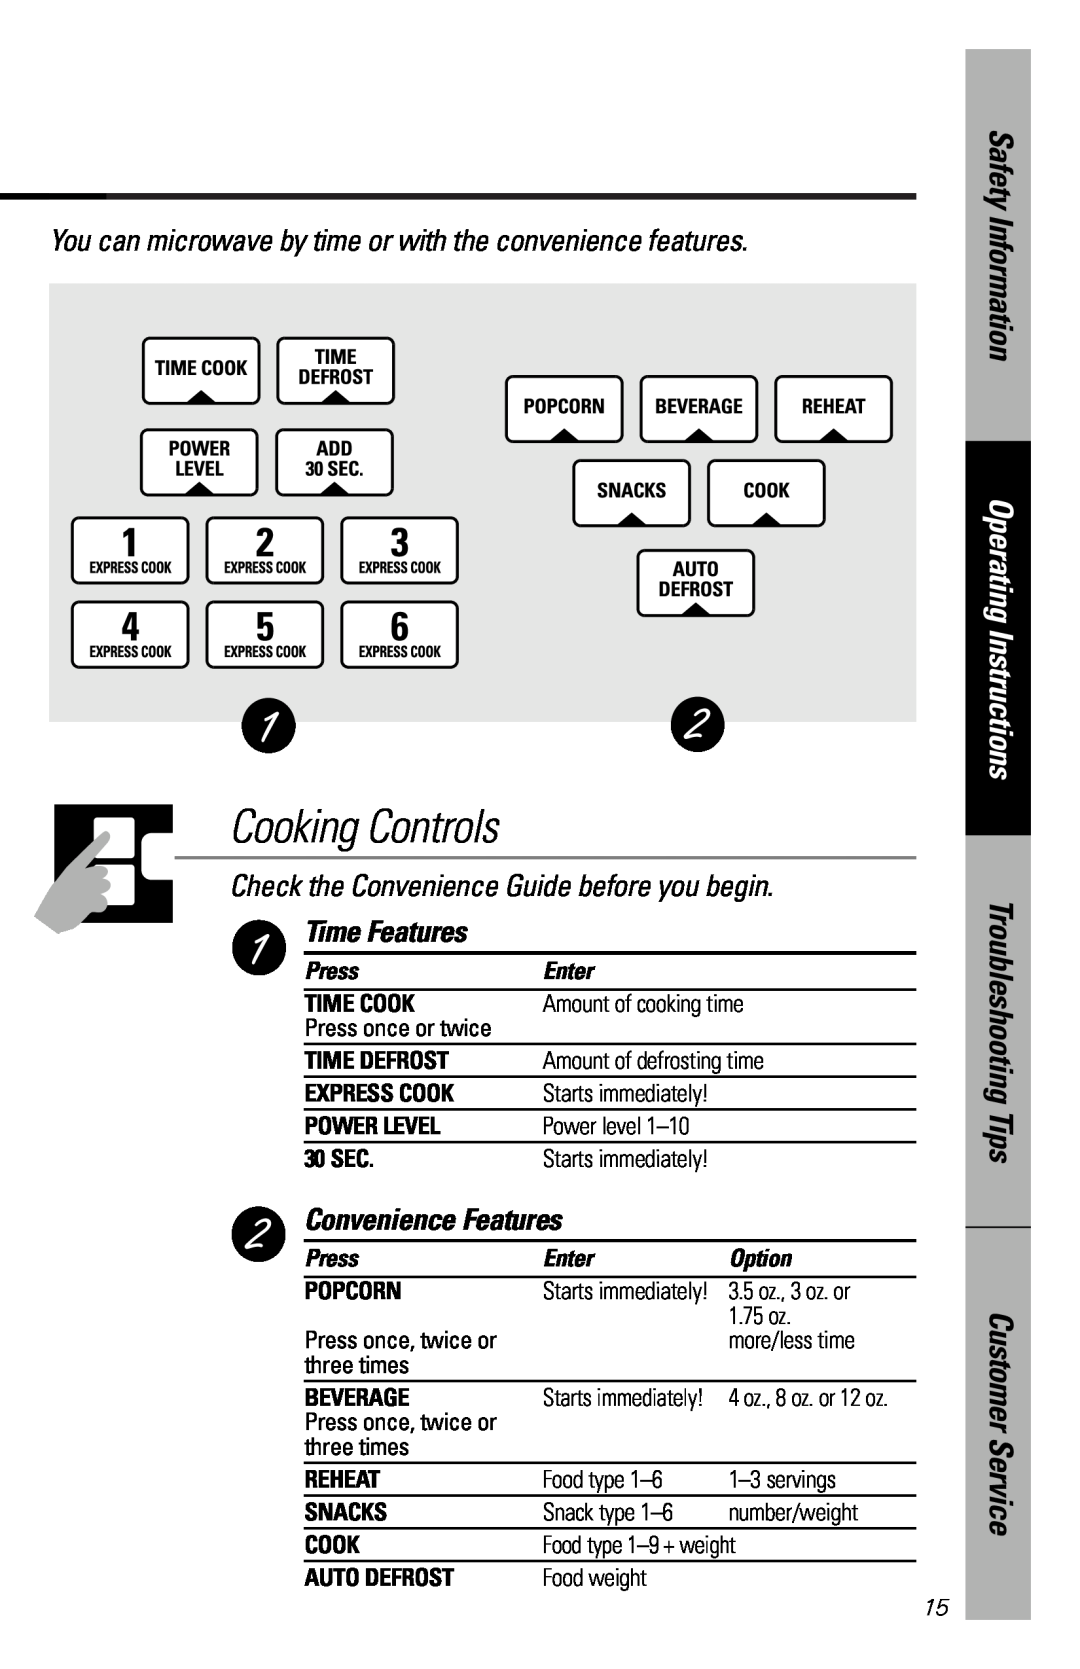 GE JES1339 Cooking Controls, Check the Convenience Guide before you begin, Time Features, Convenience Features, Time Cook 